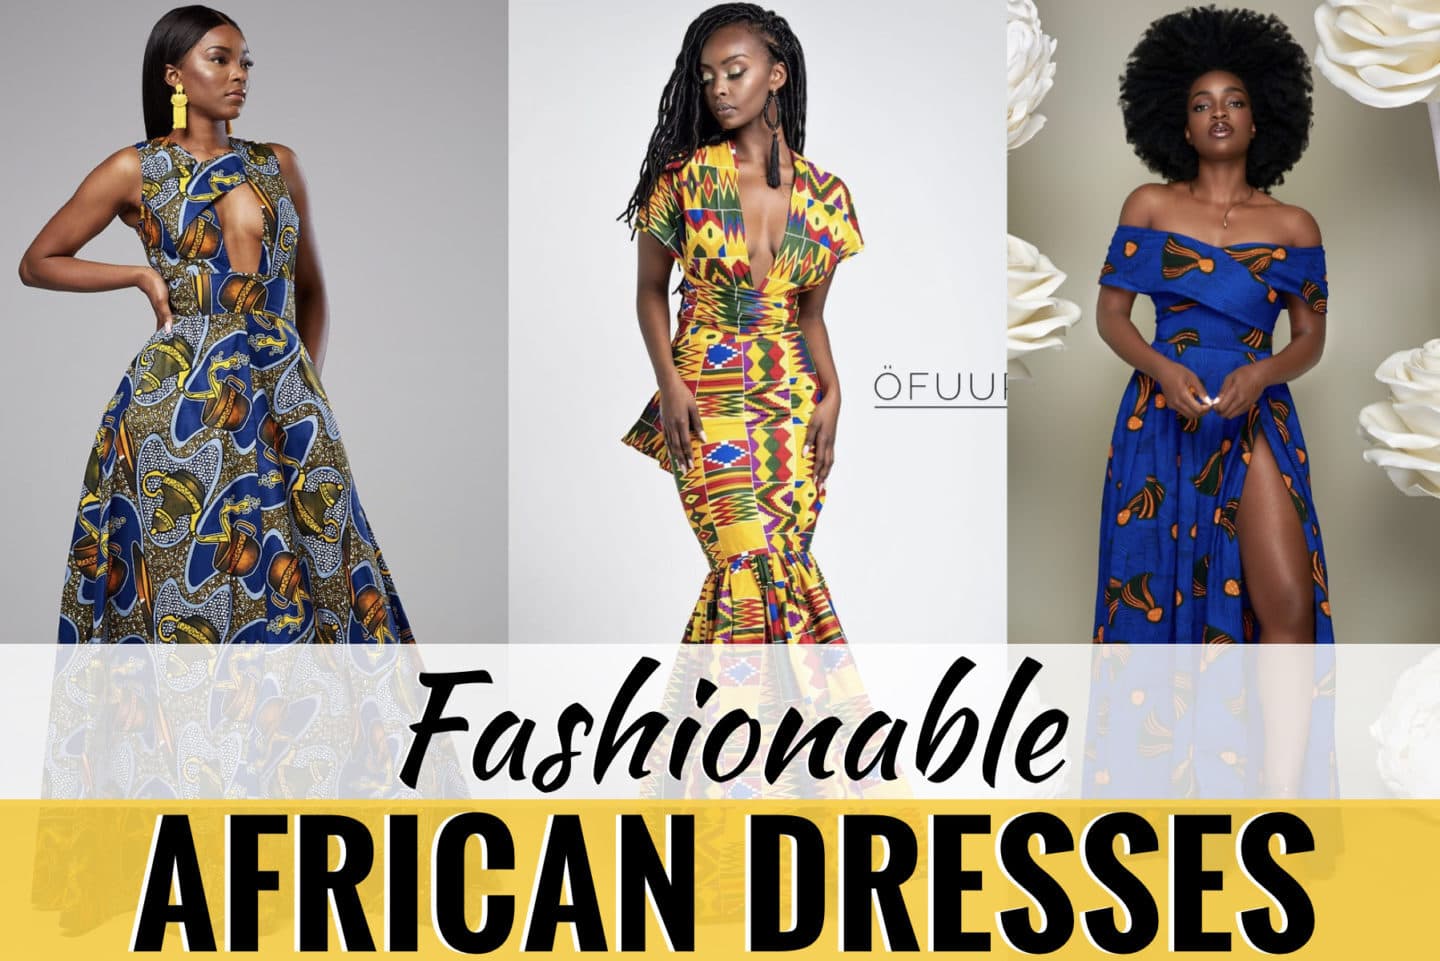 Who would have thought that African print clothes would be all the rave this year? Check out this unique selection of stunning ankara dresses from the best African fashion designers. From handmade African print made from ankara Dutch wax or Kente, to African prom dresses made from Dashiki. All your favorite styles in one place (+find out where to get them). Click to see all! Ankara, Dutch wax, Kente, Kitenge, Dashiki, African print dress, African fashion, African women dresses, African prints, Nigerian style, Ghanaian fashion, Senegal fashion, Kenya fashion, Nigerian fashion #africanprint #ankarastyles 